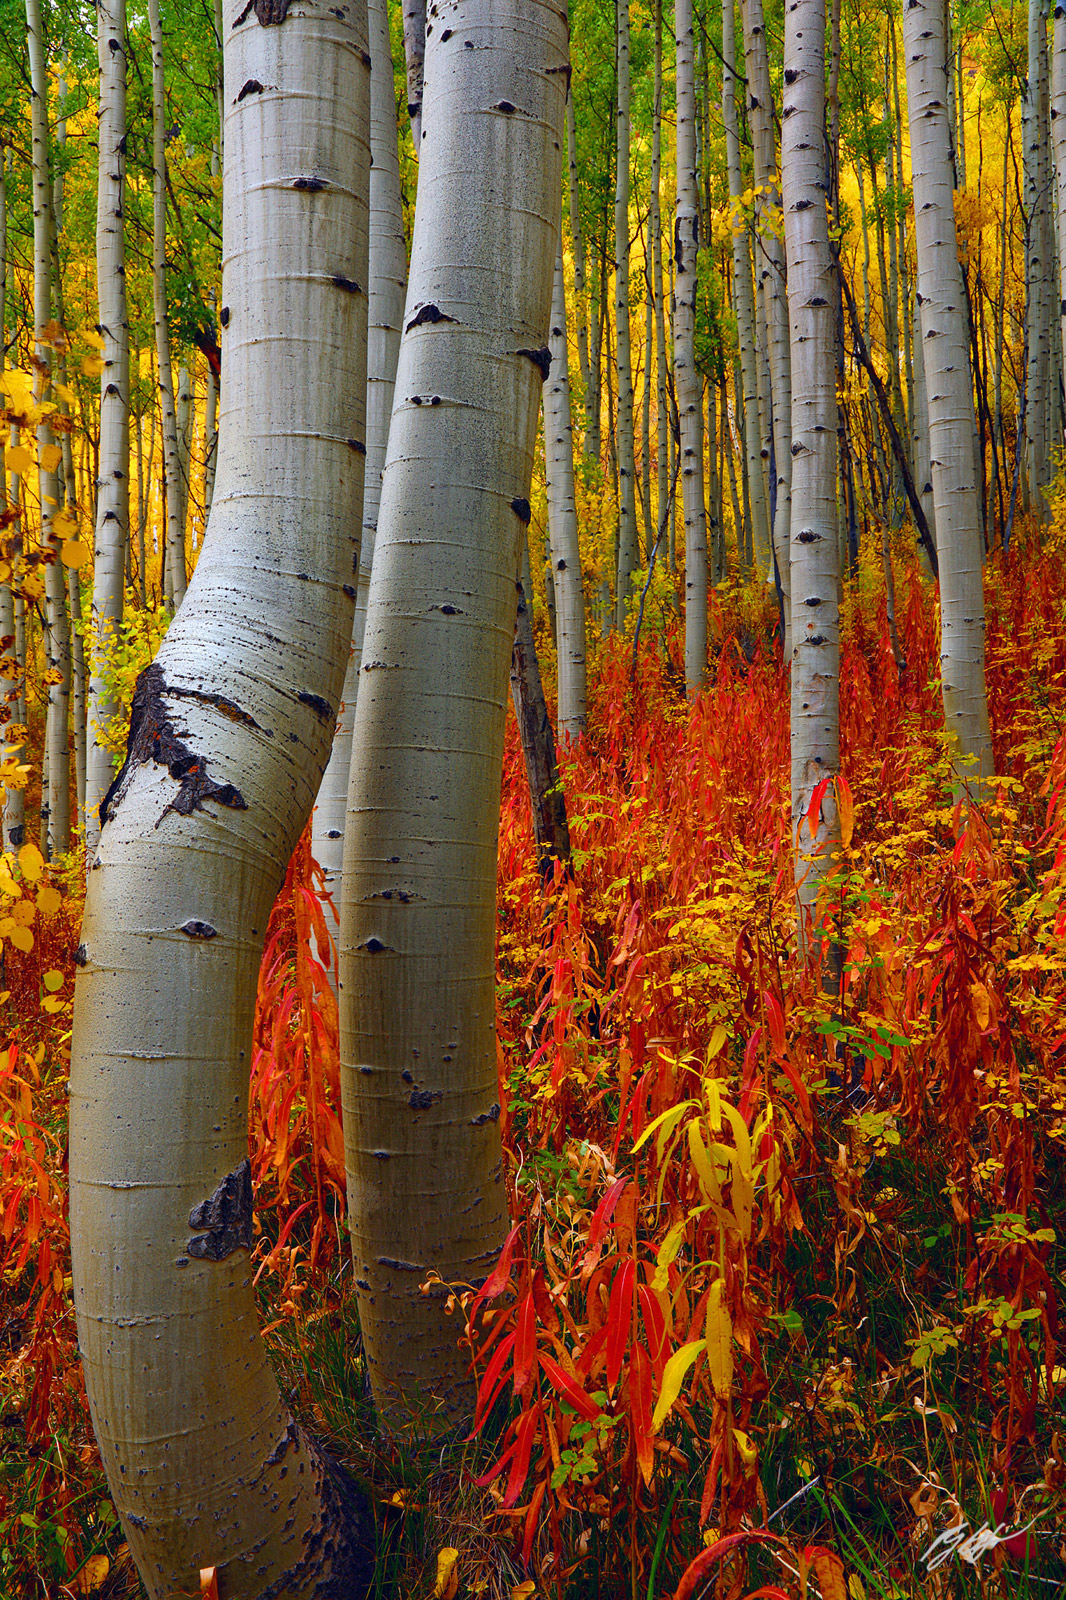 Fall Color and Aspens in the Maroon Bells-Snowmass Wilderness in Colorado